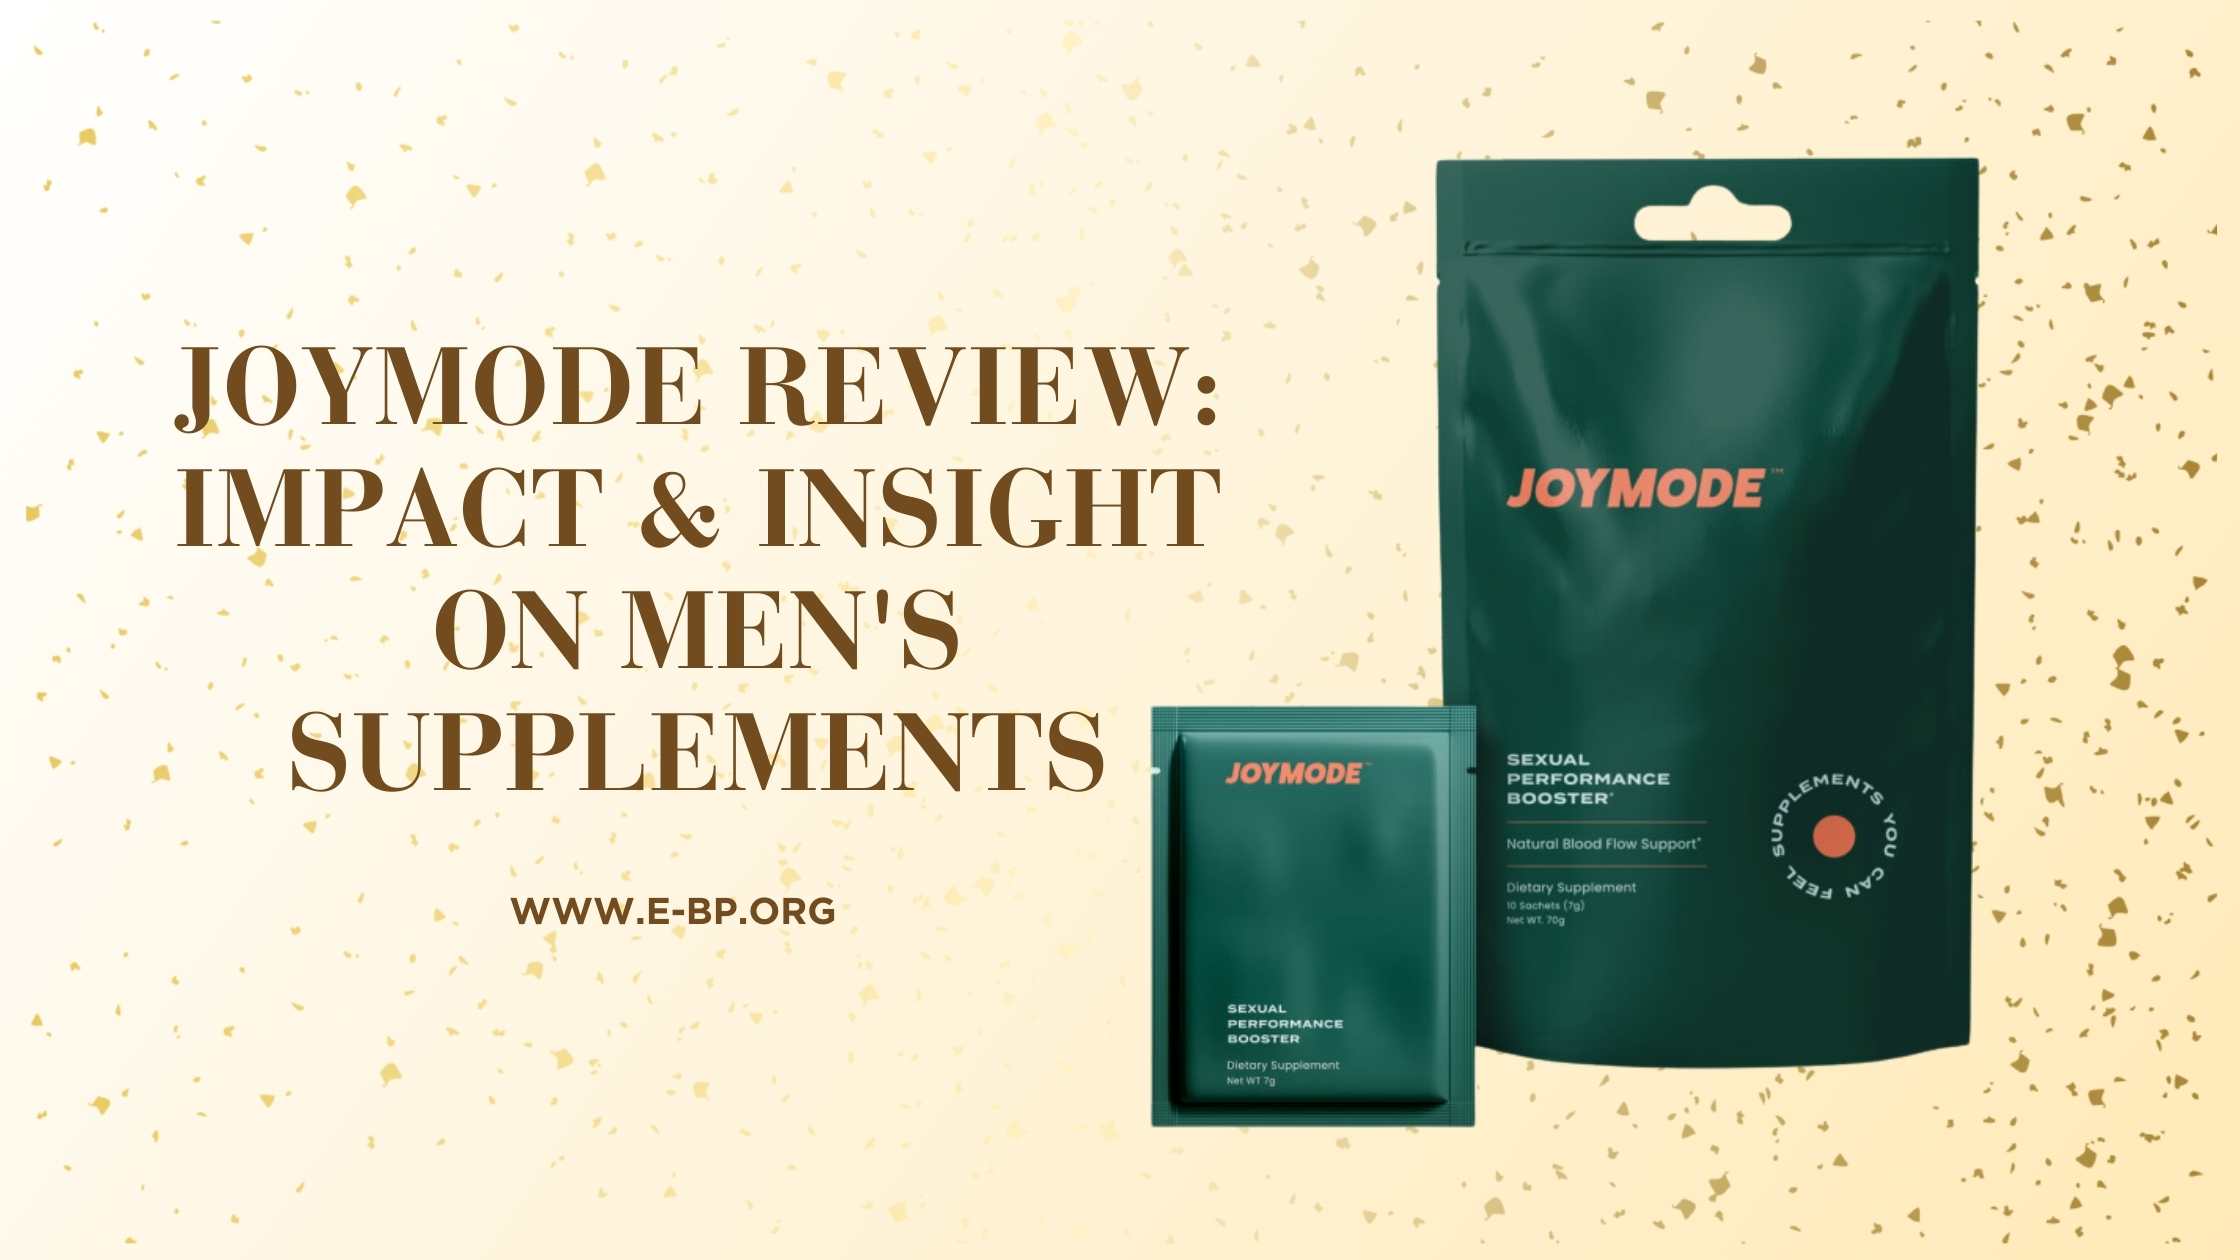 Joymode Review Impact & Insight on Men's Supplements